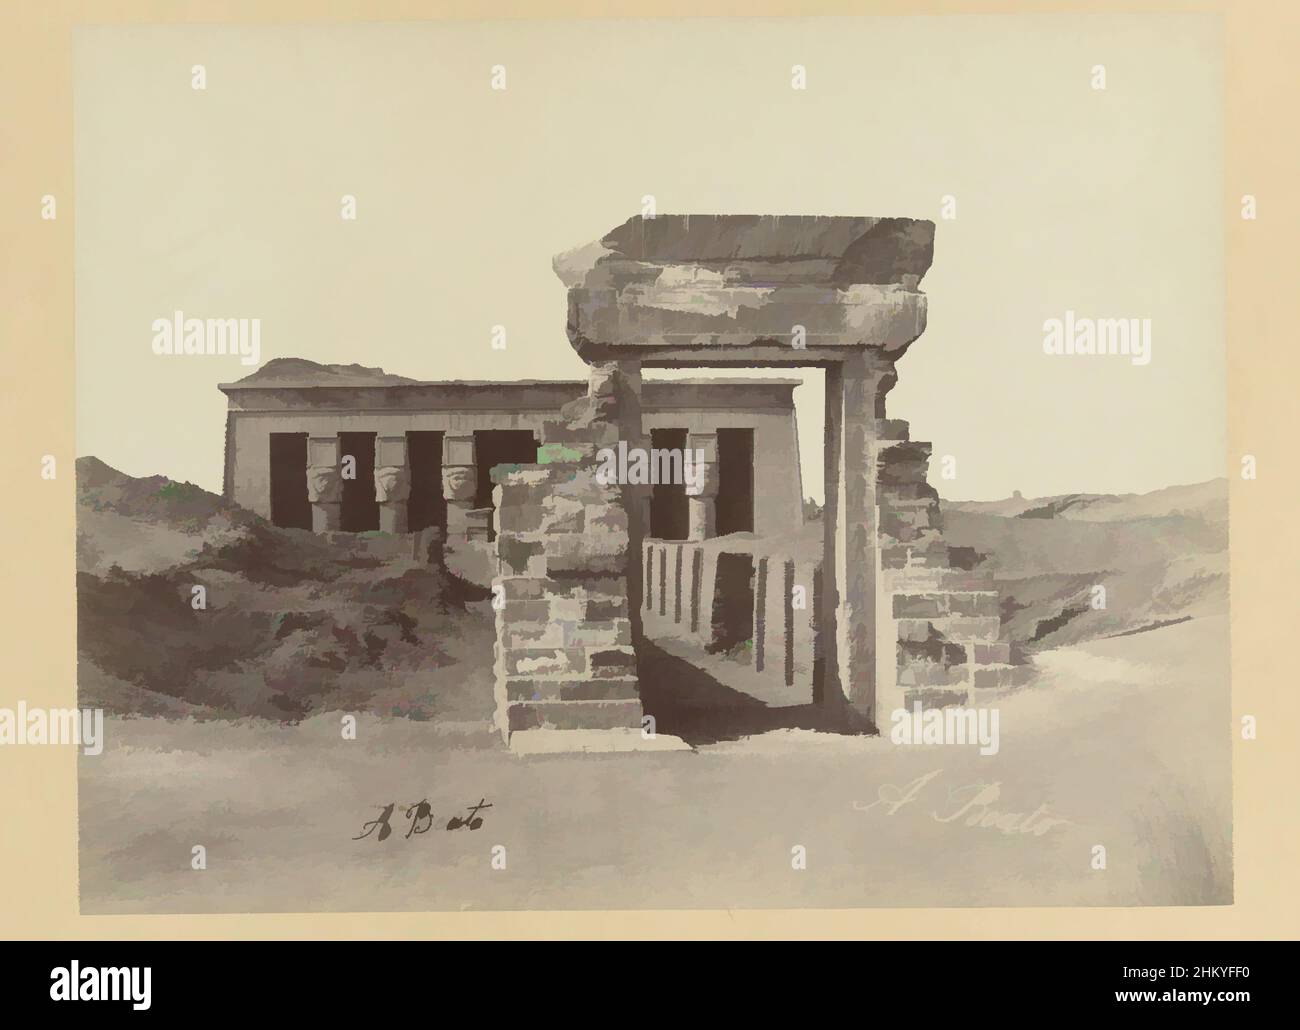 Art inspired by Remains of the temple of Denderah, E 67. Temple of Denderah (beginning of our era). Upper Egypt. (On this temple, before Mariette Bey excavated it, there was an Arab village)., The photograph is part of the series of photographs from Egypt collected by Richard Polak, Classic works modernized by Artotop with a splash of modernity. Shapes, color and value, eye-catching visual impact on art. Emotions through freedom of artworks in a contemporary way. A timeless message pursuing a wildly creative new direction. Artists turning to the digital medium and creating the Artotop NFT Stock Photo